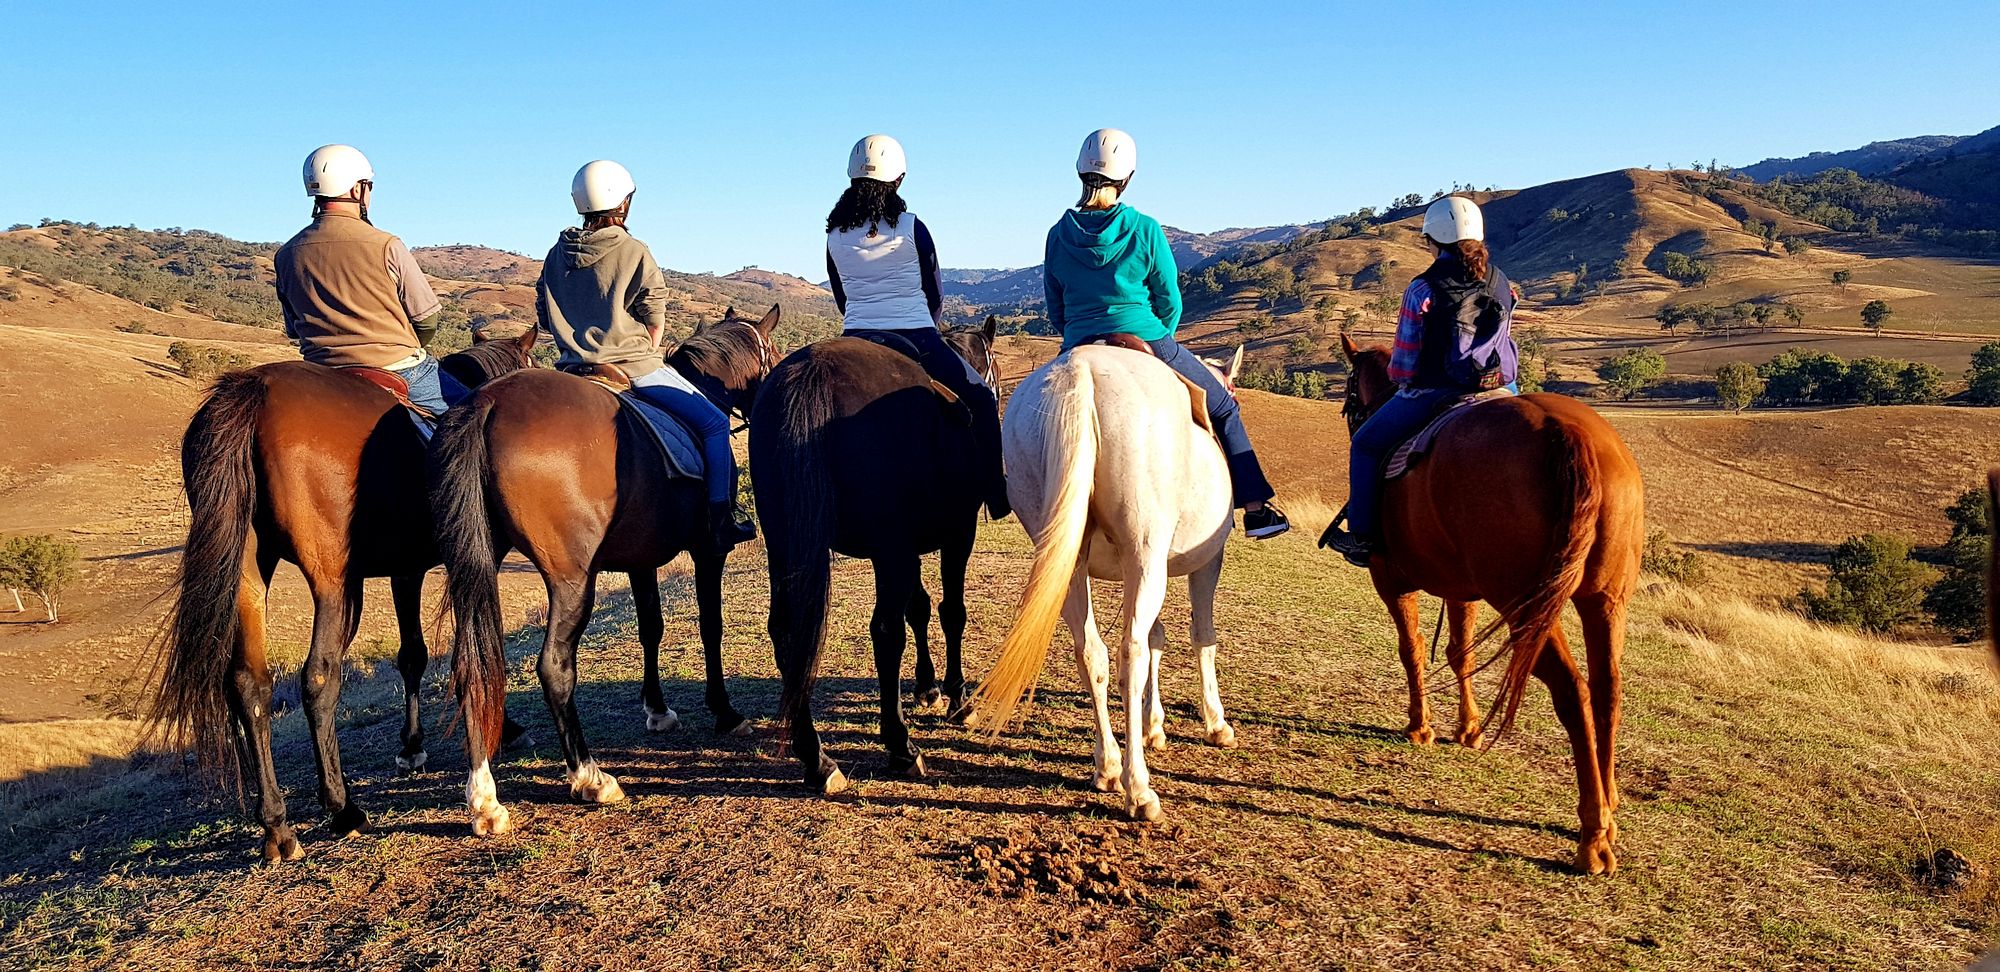 7 horse tours and travels